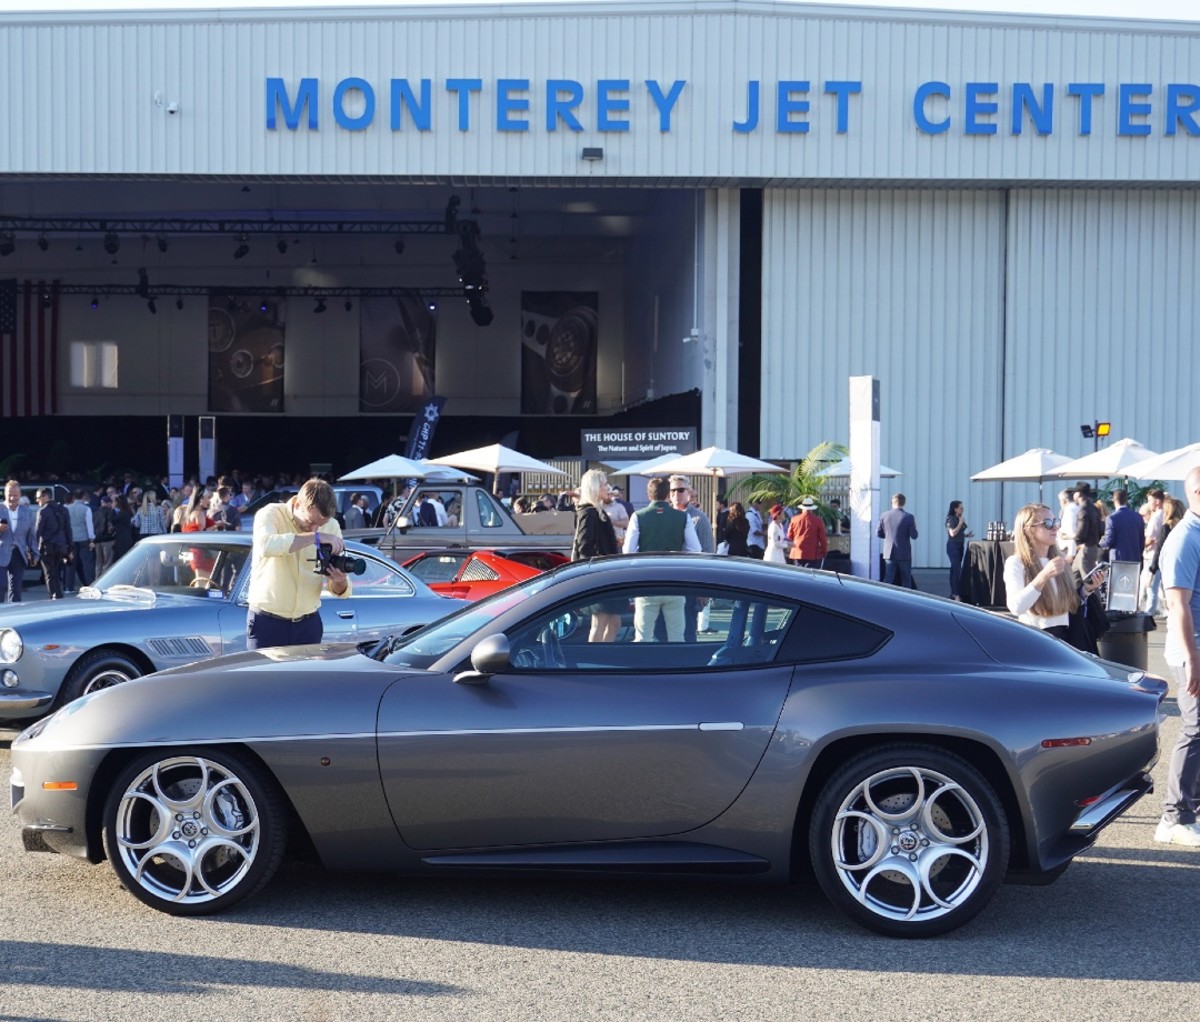 Monterey Car Week brought out a whole bunch or amazing cars, new and old.